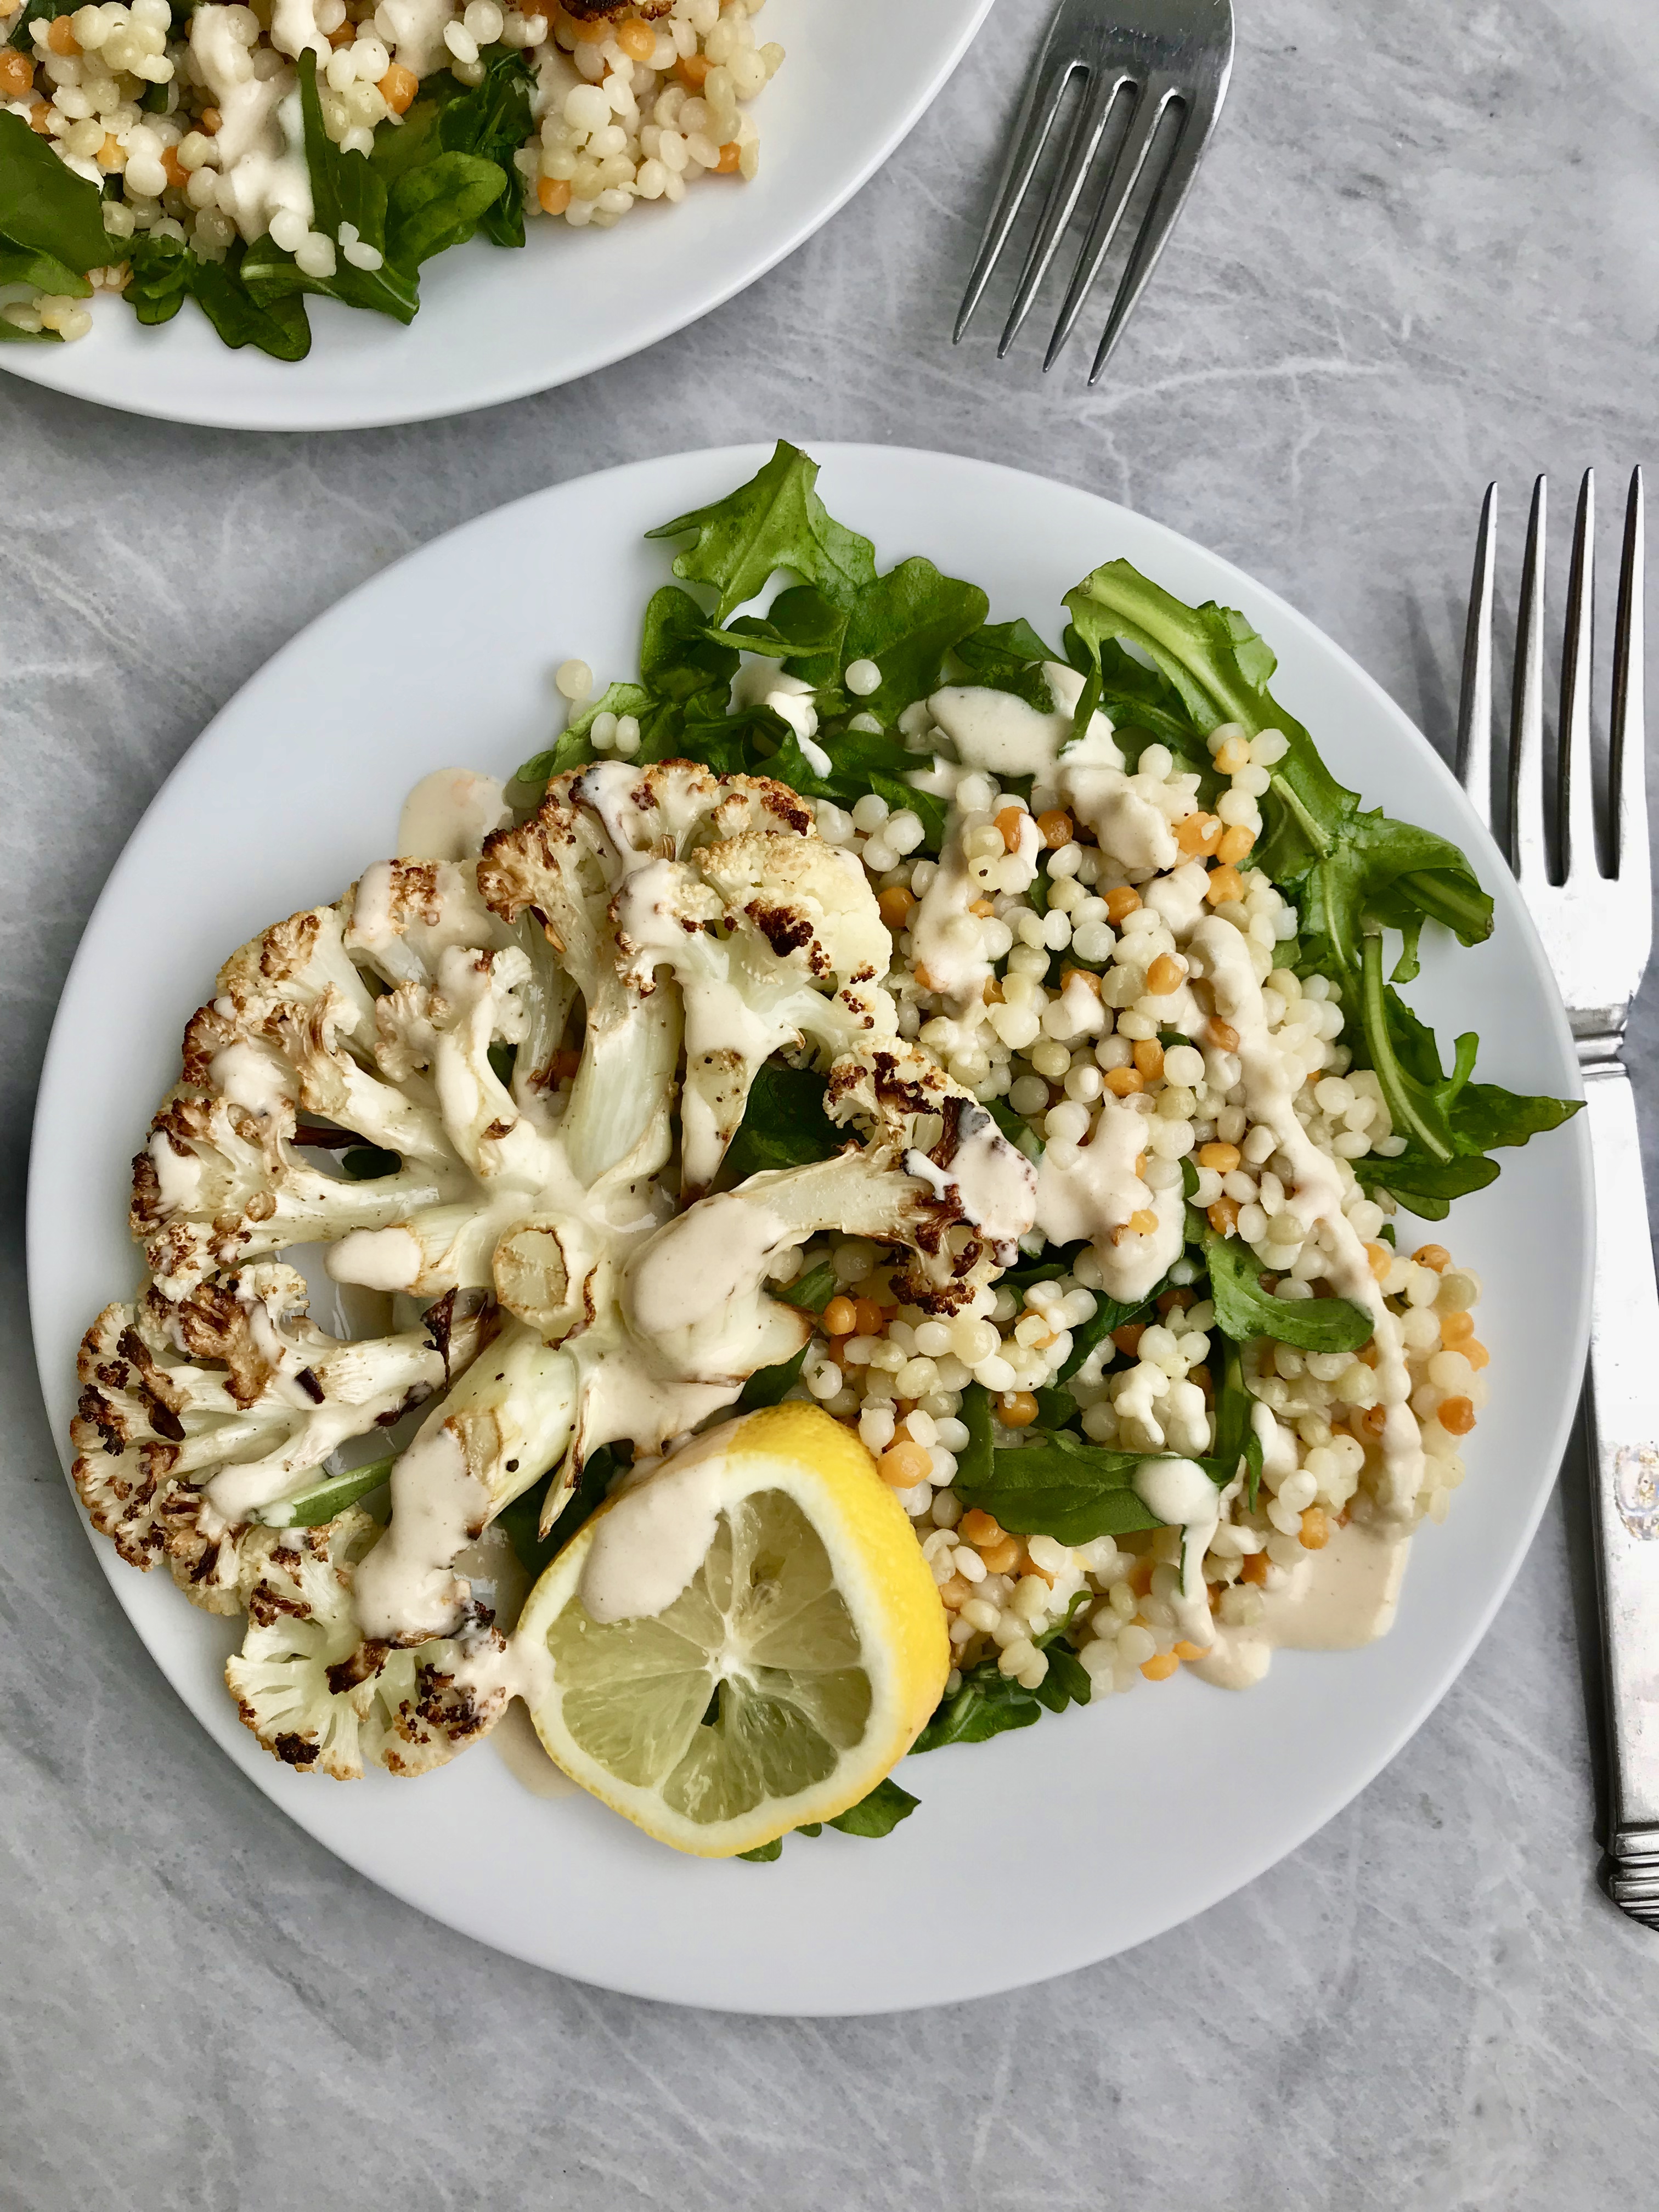 Cauliflower Steaks with Pearled Couscous Salad & Tahini Dressing.